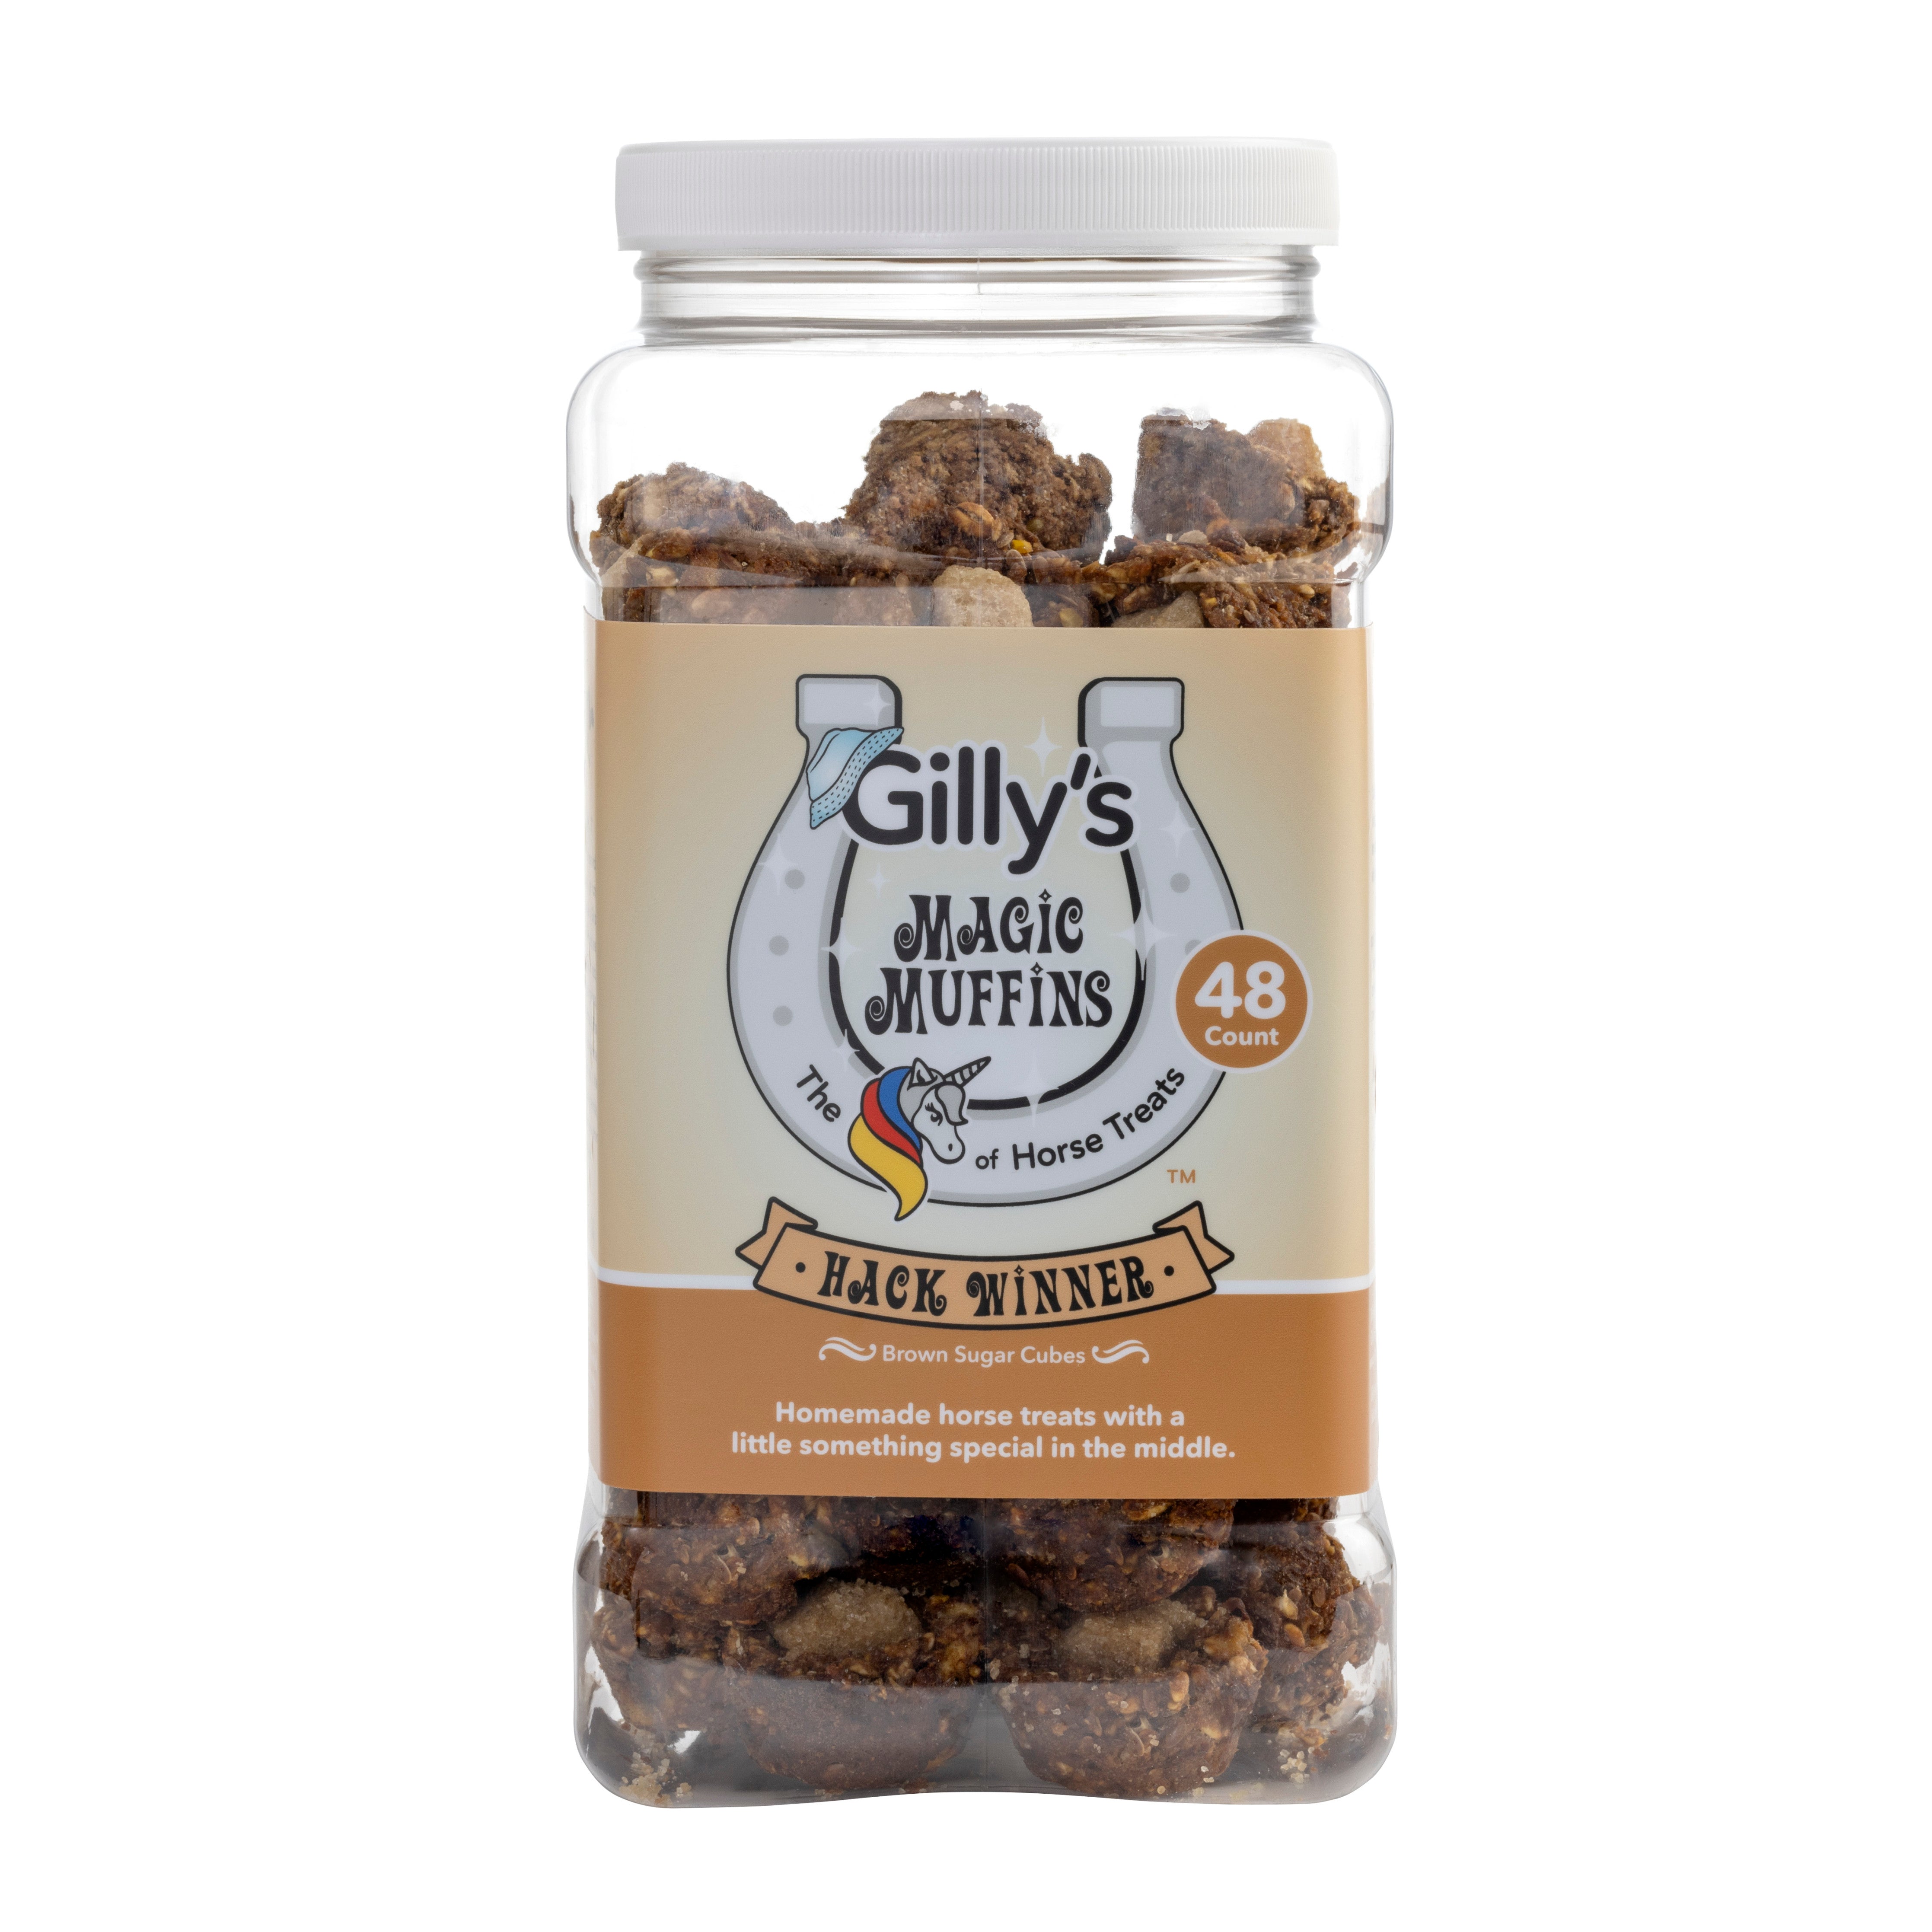 Gilly's Magic Muffins 48-ct jar